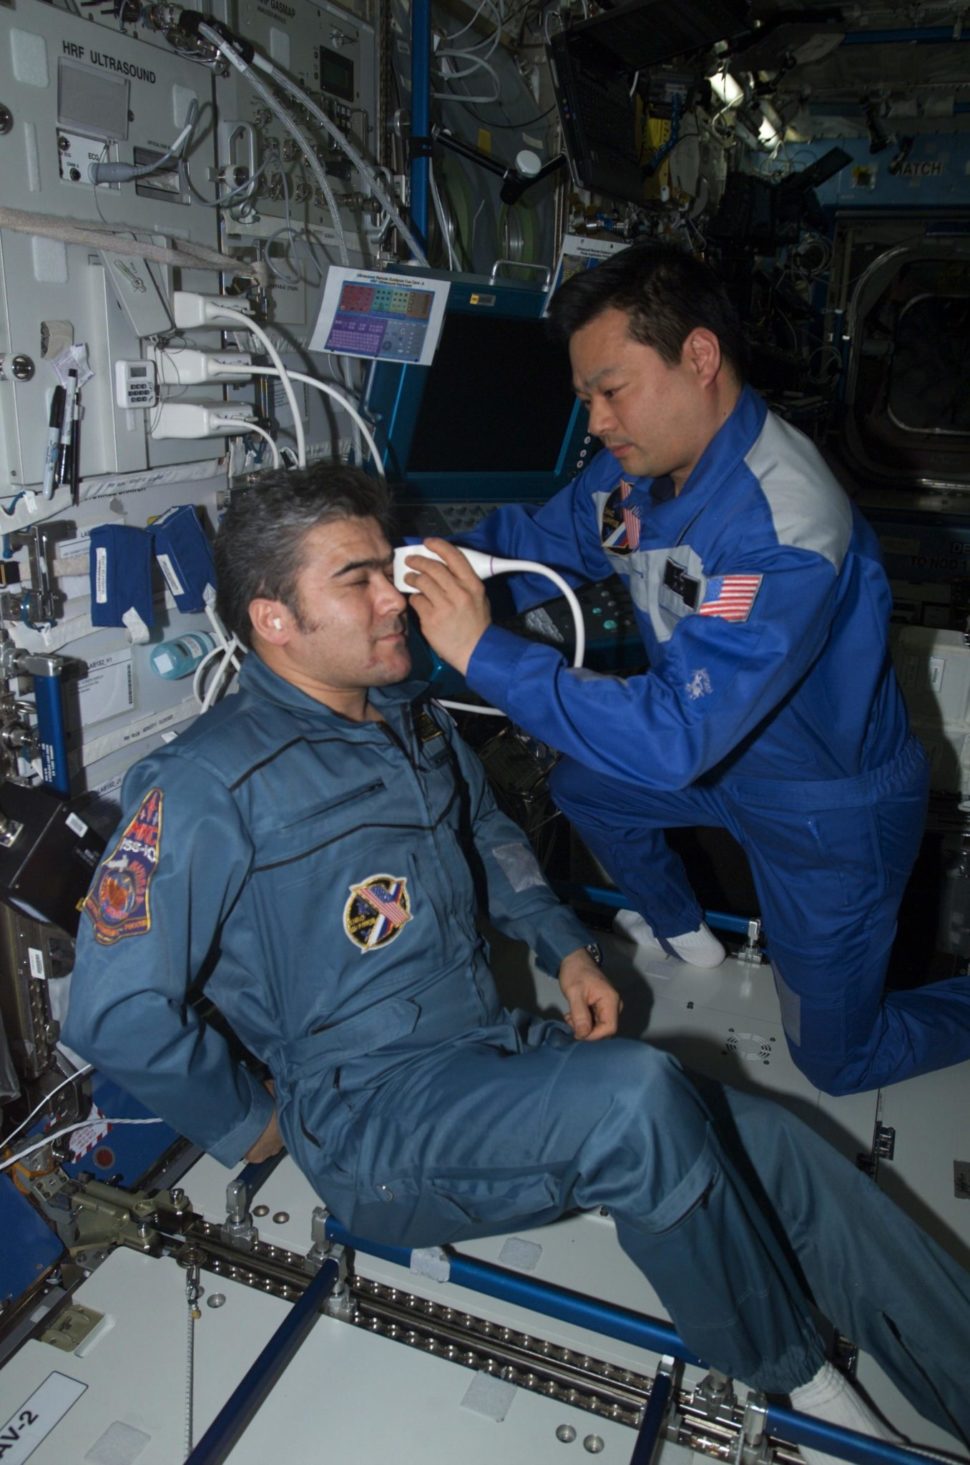 Using the ADUM protocols, ISS Expedition Commander Leroy Chiao performs an ultrasound examination of the eye on Flight Engineer Salizhan Sharipov. | NASA